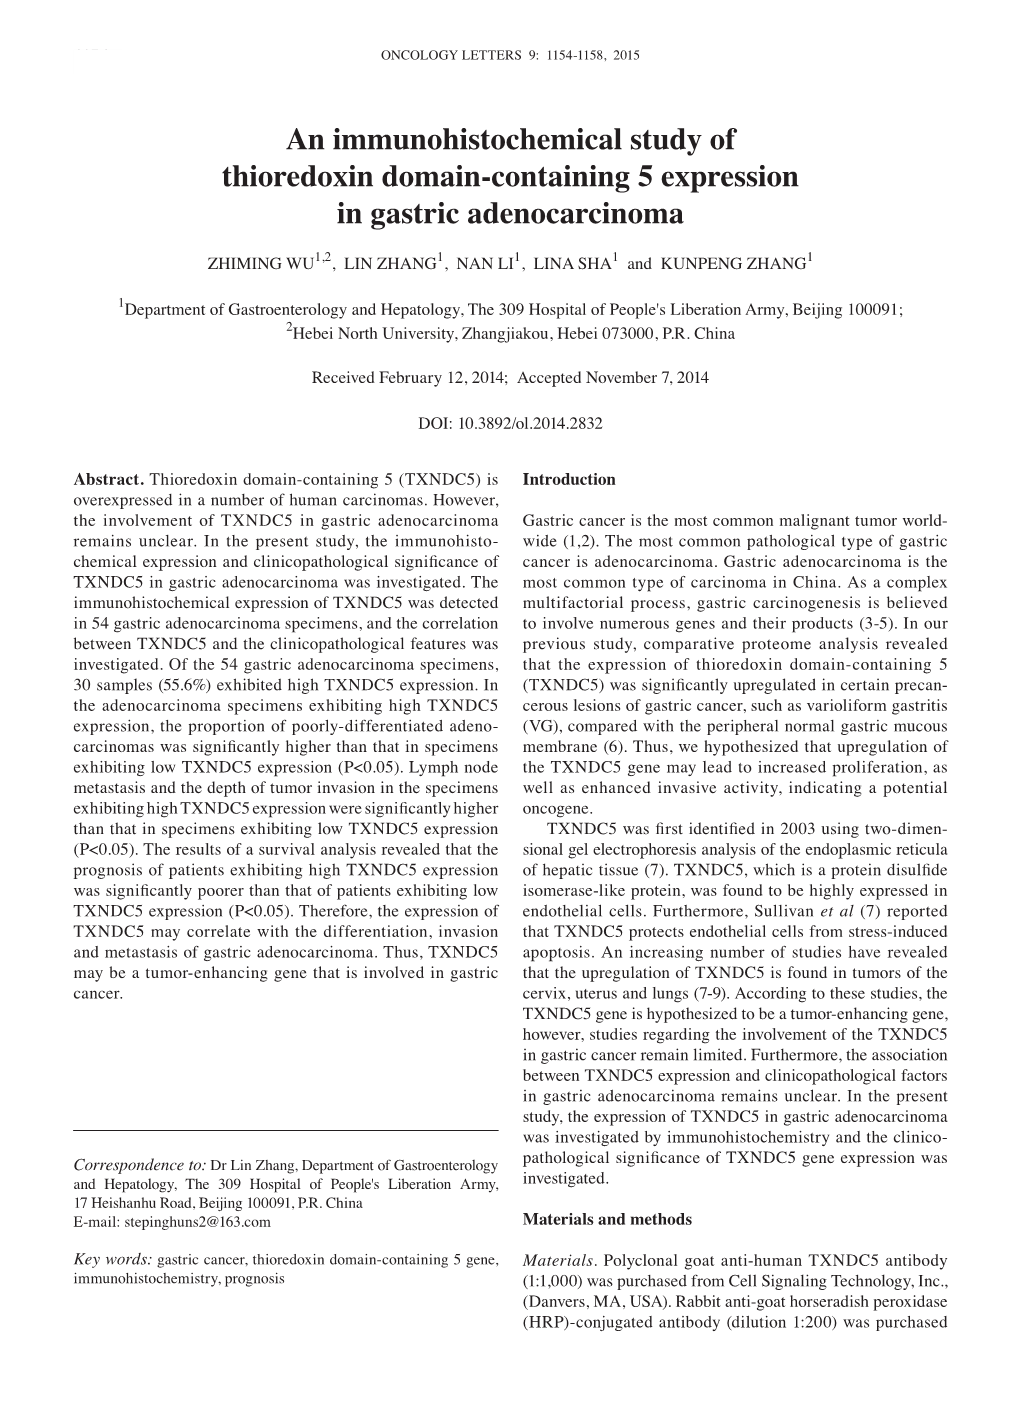 An Immunohistochemical Study of Thioredoxin Domain-Containing 5 Expression in Gastric Adenocarcinoma